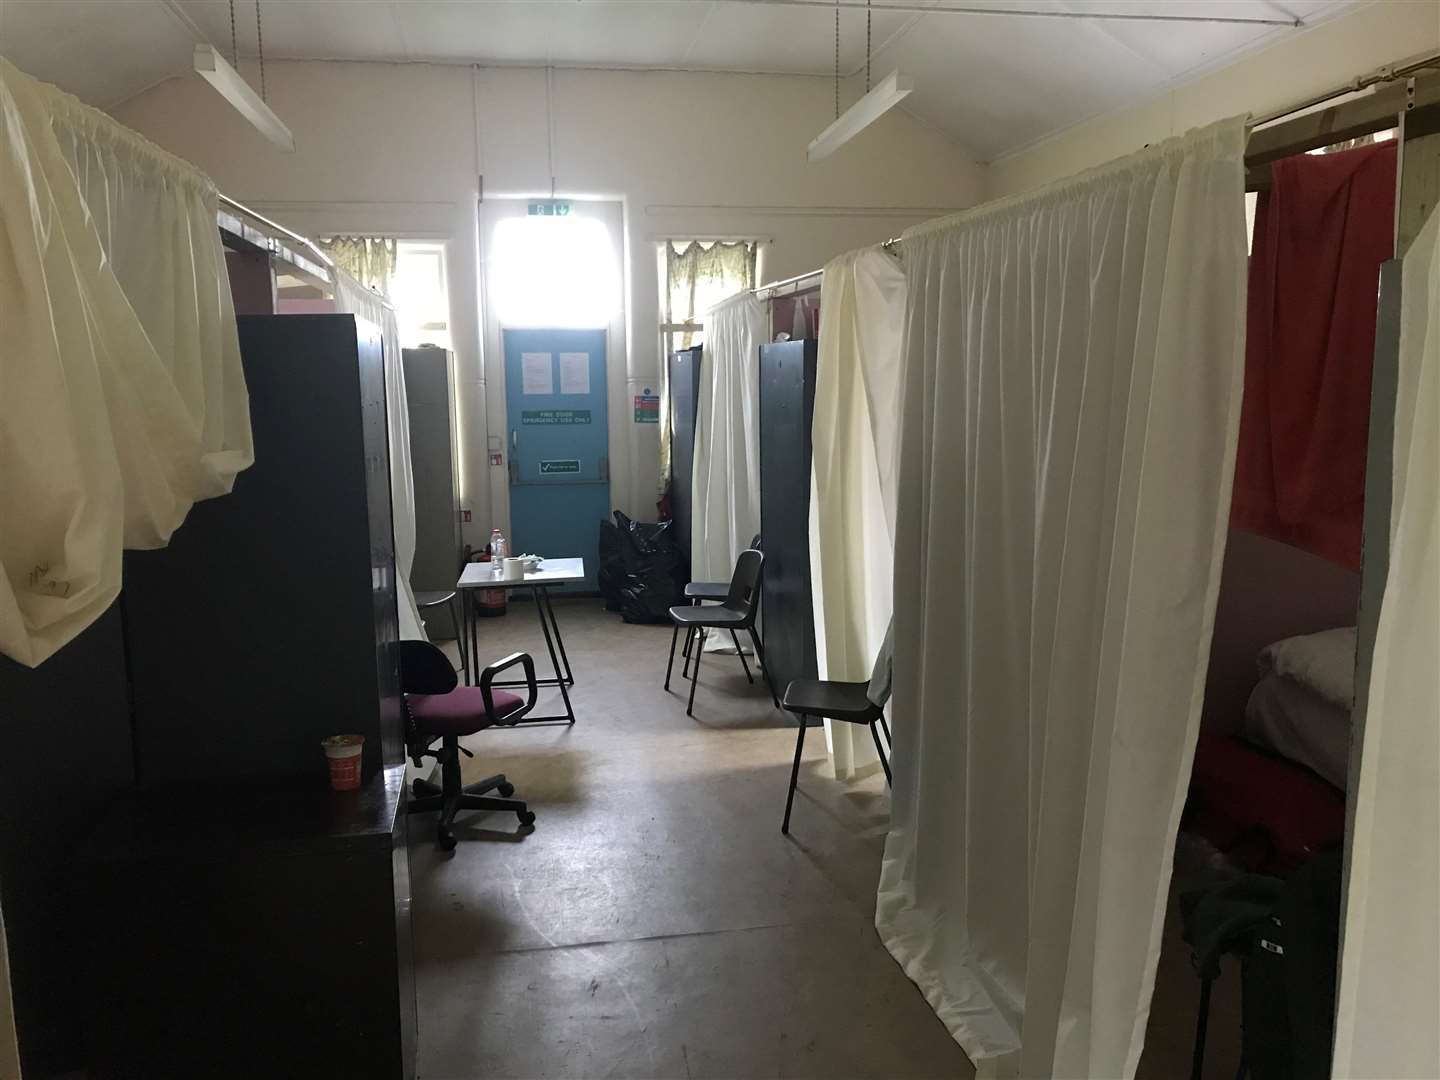 Pictures show inside Napier Barracks in Folkestone, where asylum seekers have been living. Picture: Independent Chief Inspector of Borders and Immigration